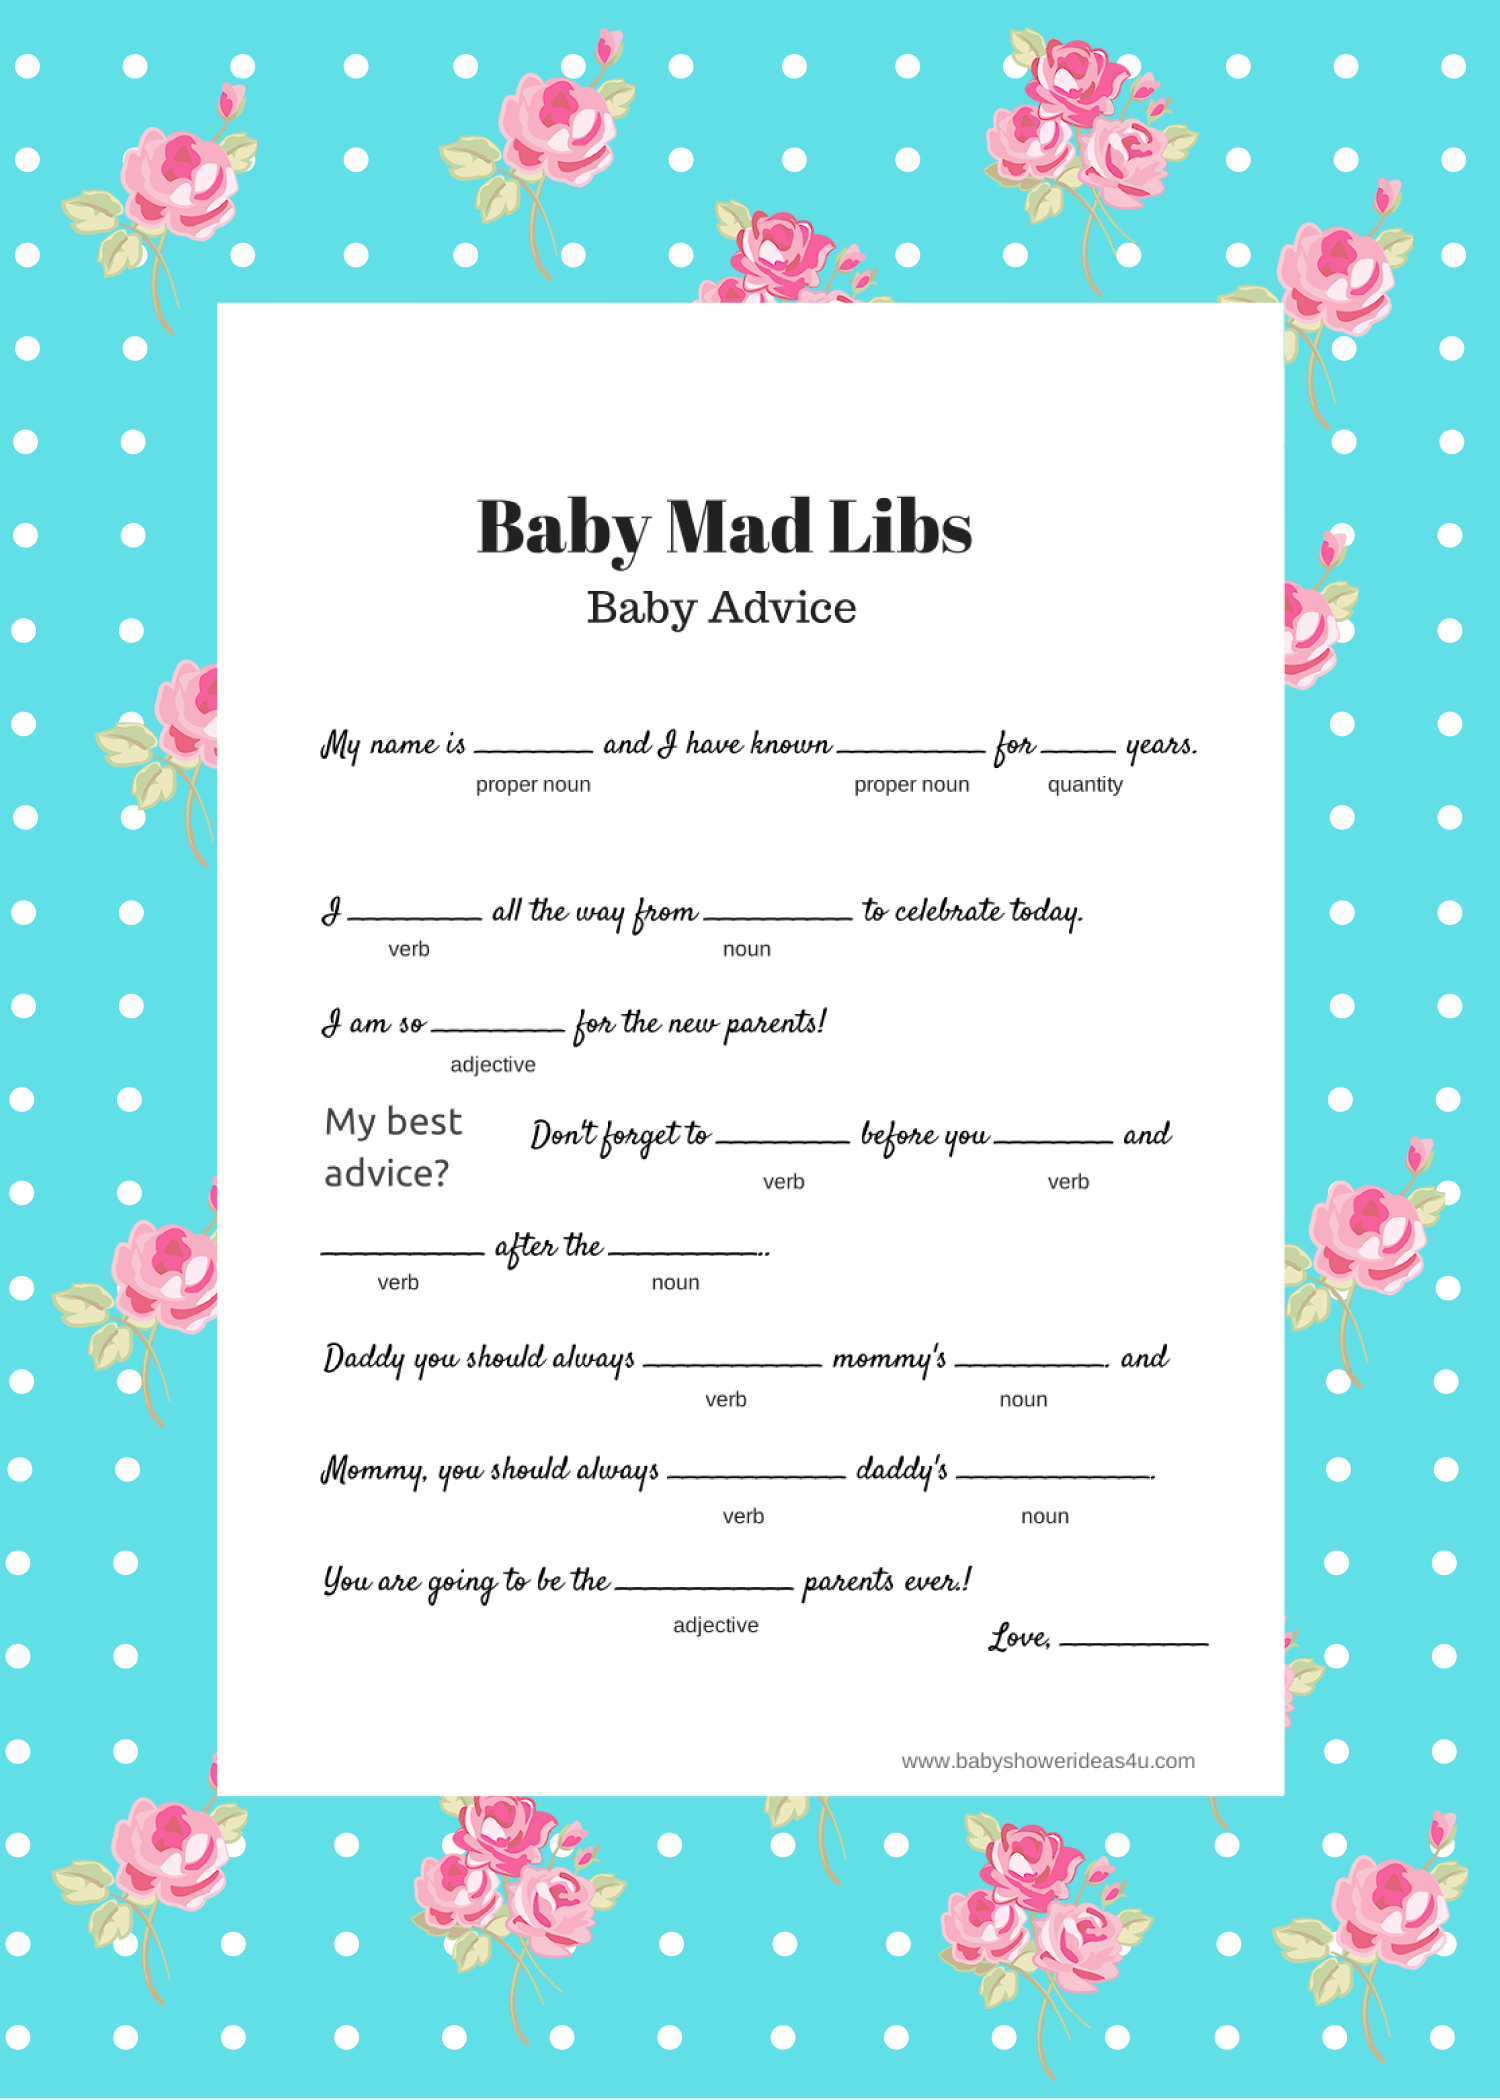 FREE Baby Mad Libs Game Baby Advice Baby Shower Ideas 